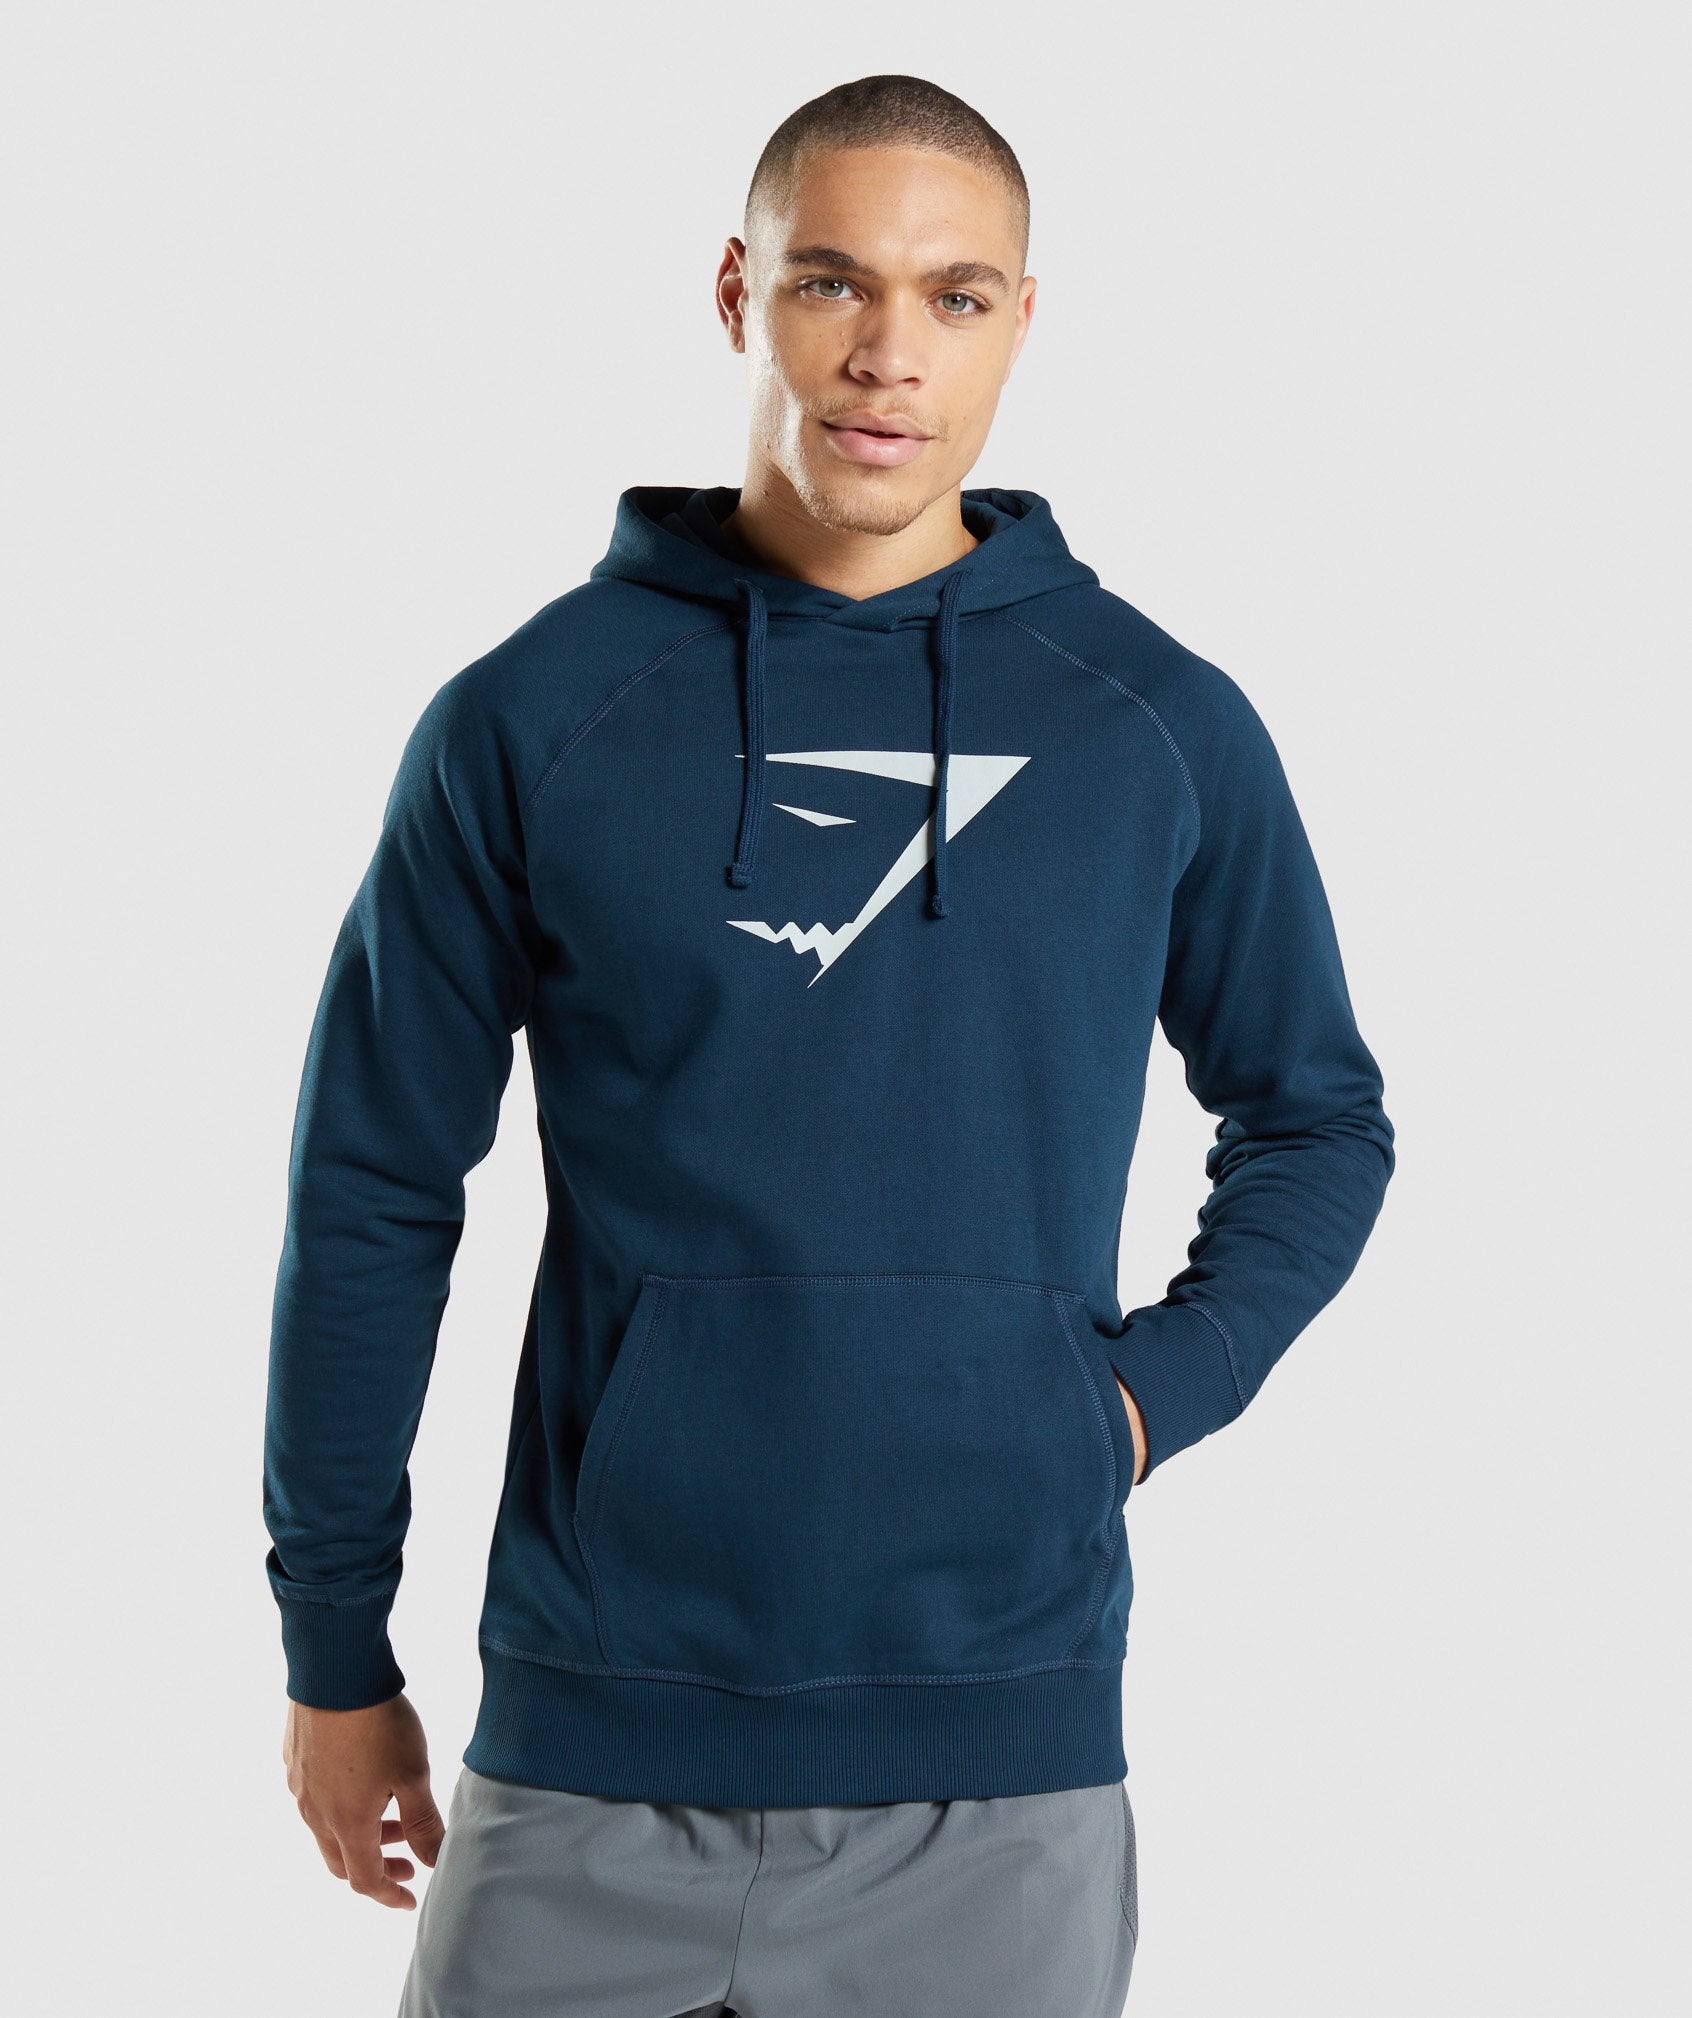 Sharkhead Infill Hoodie in Navy - view 1